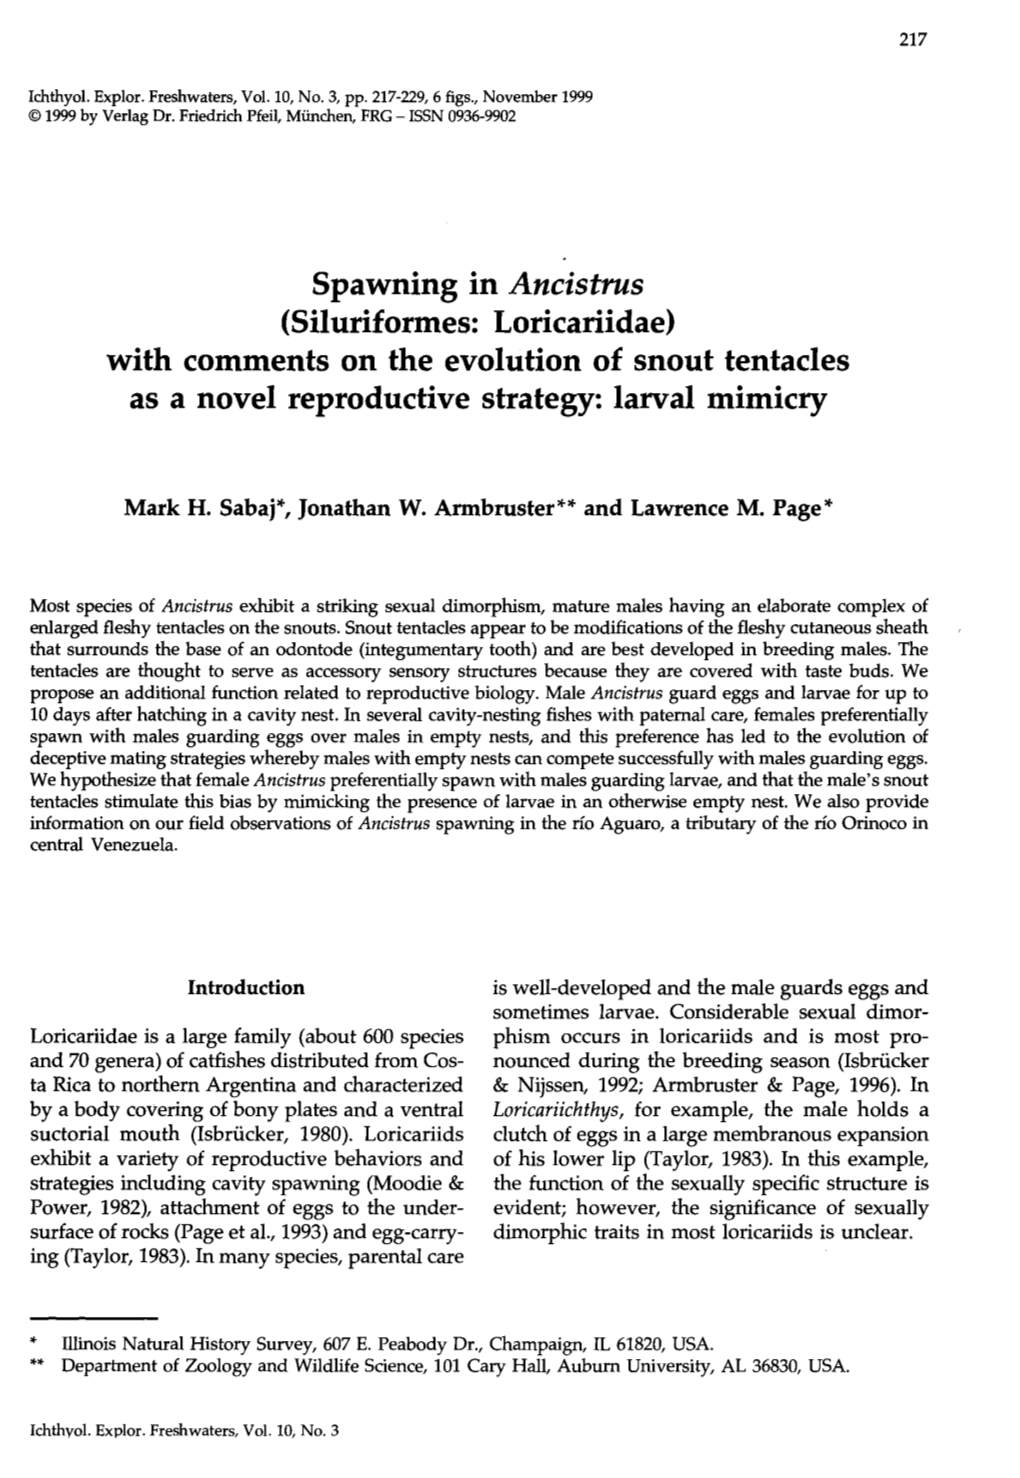 Spawning in Ancistrus (Siluriformes: Loricariidae) with Comments on the Evolution of Snout Tentacles As a Novel Reproductive Strategy: Larval Mimicry